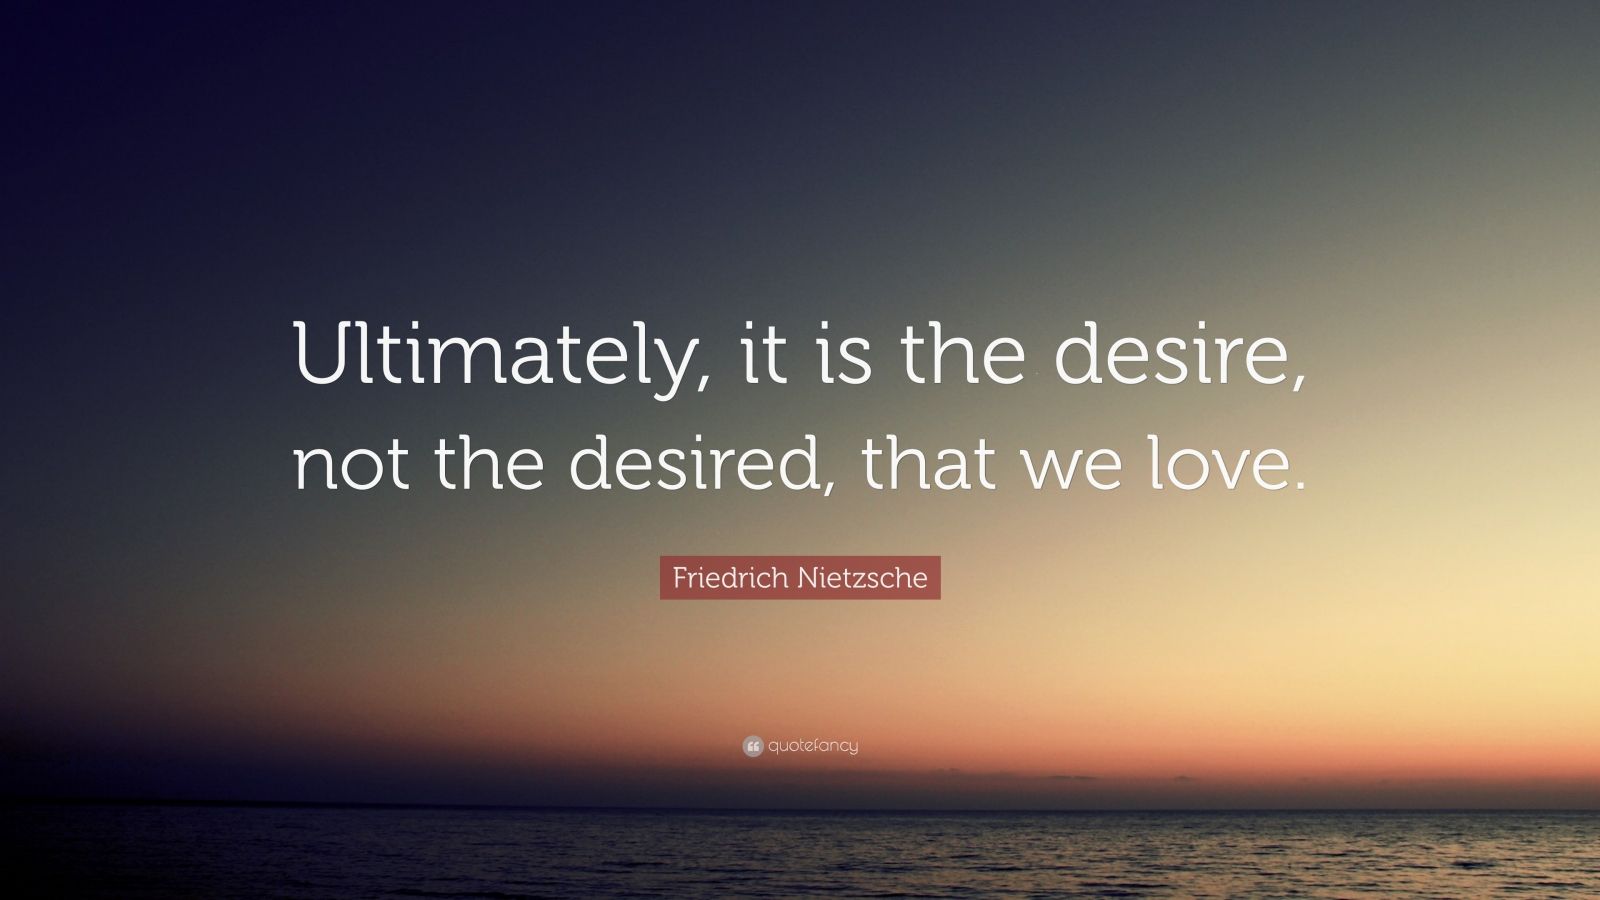 Friedrich Nietzsche Quote: “Ultimately, it is the desire, not the ...